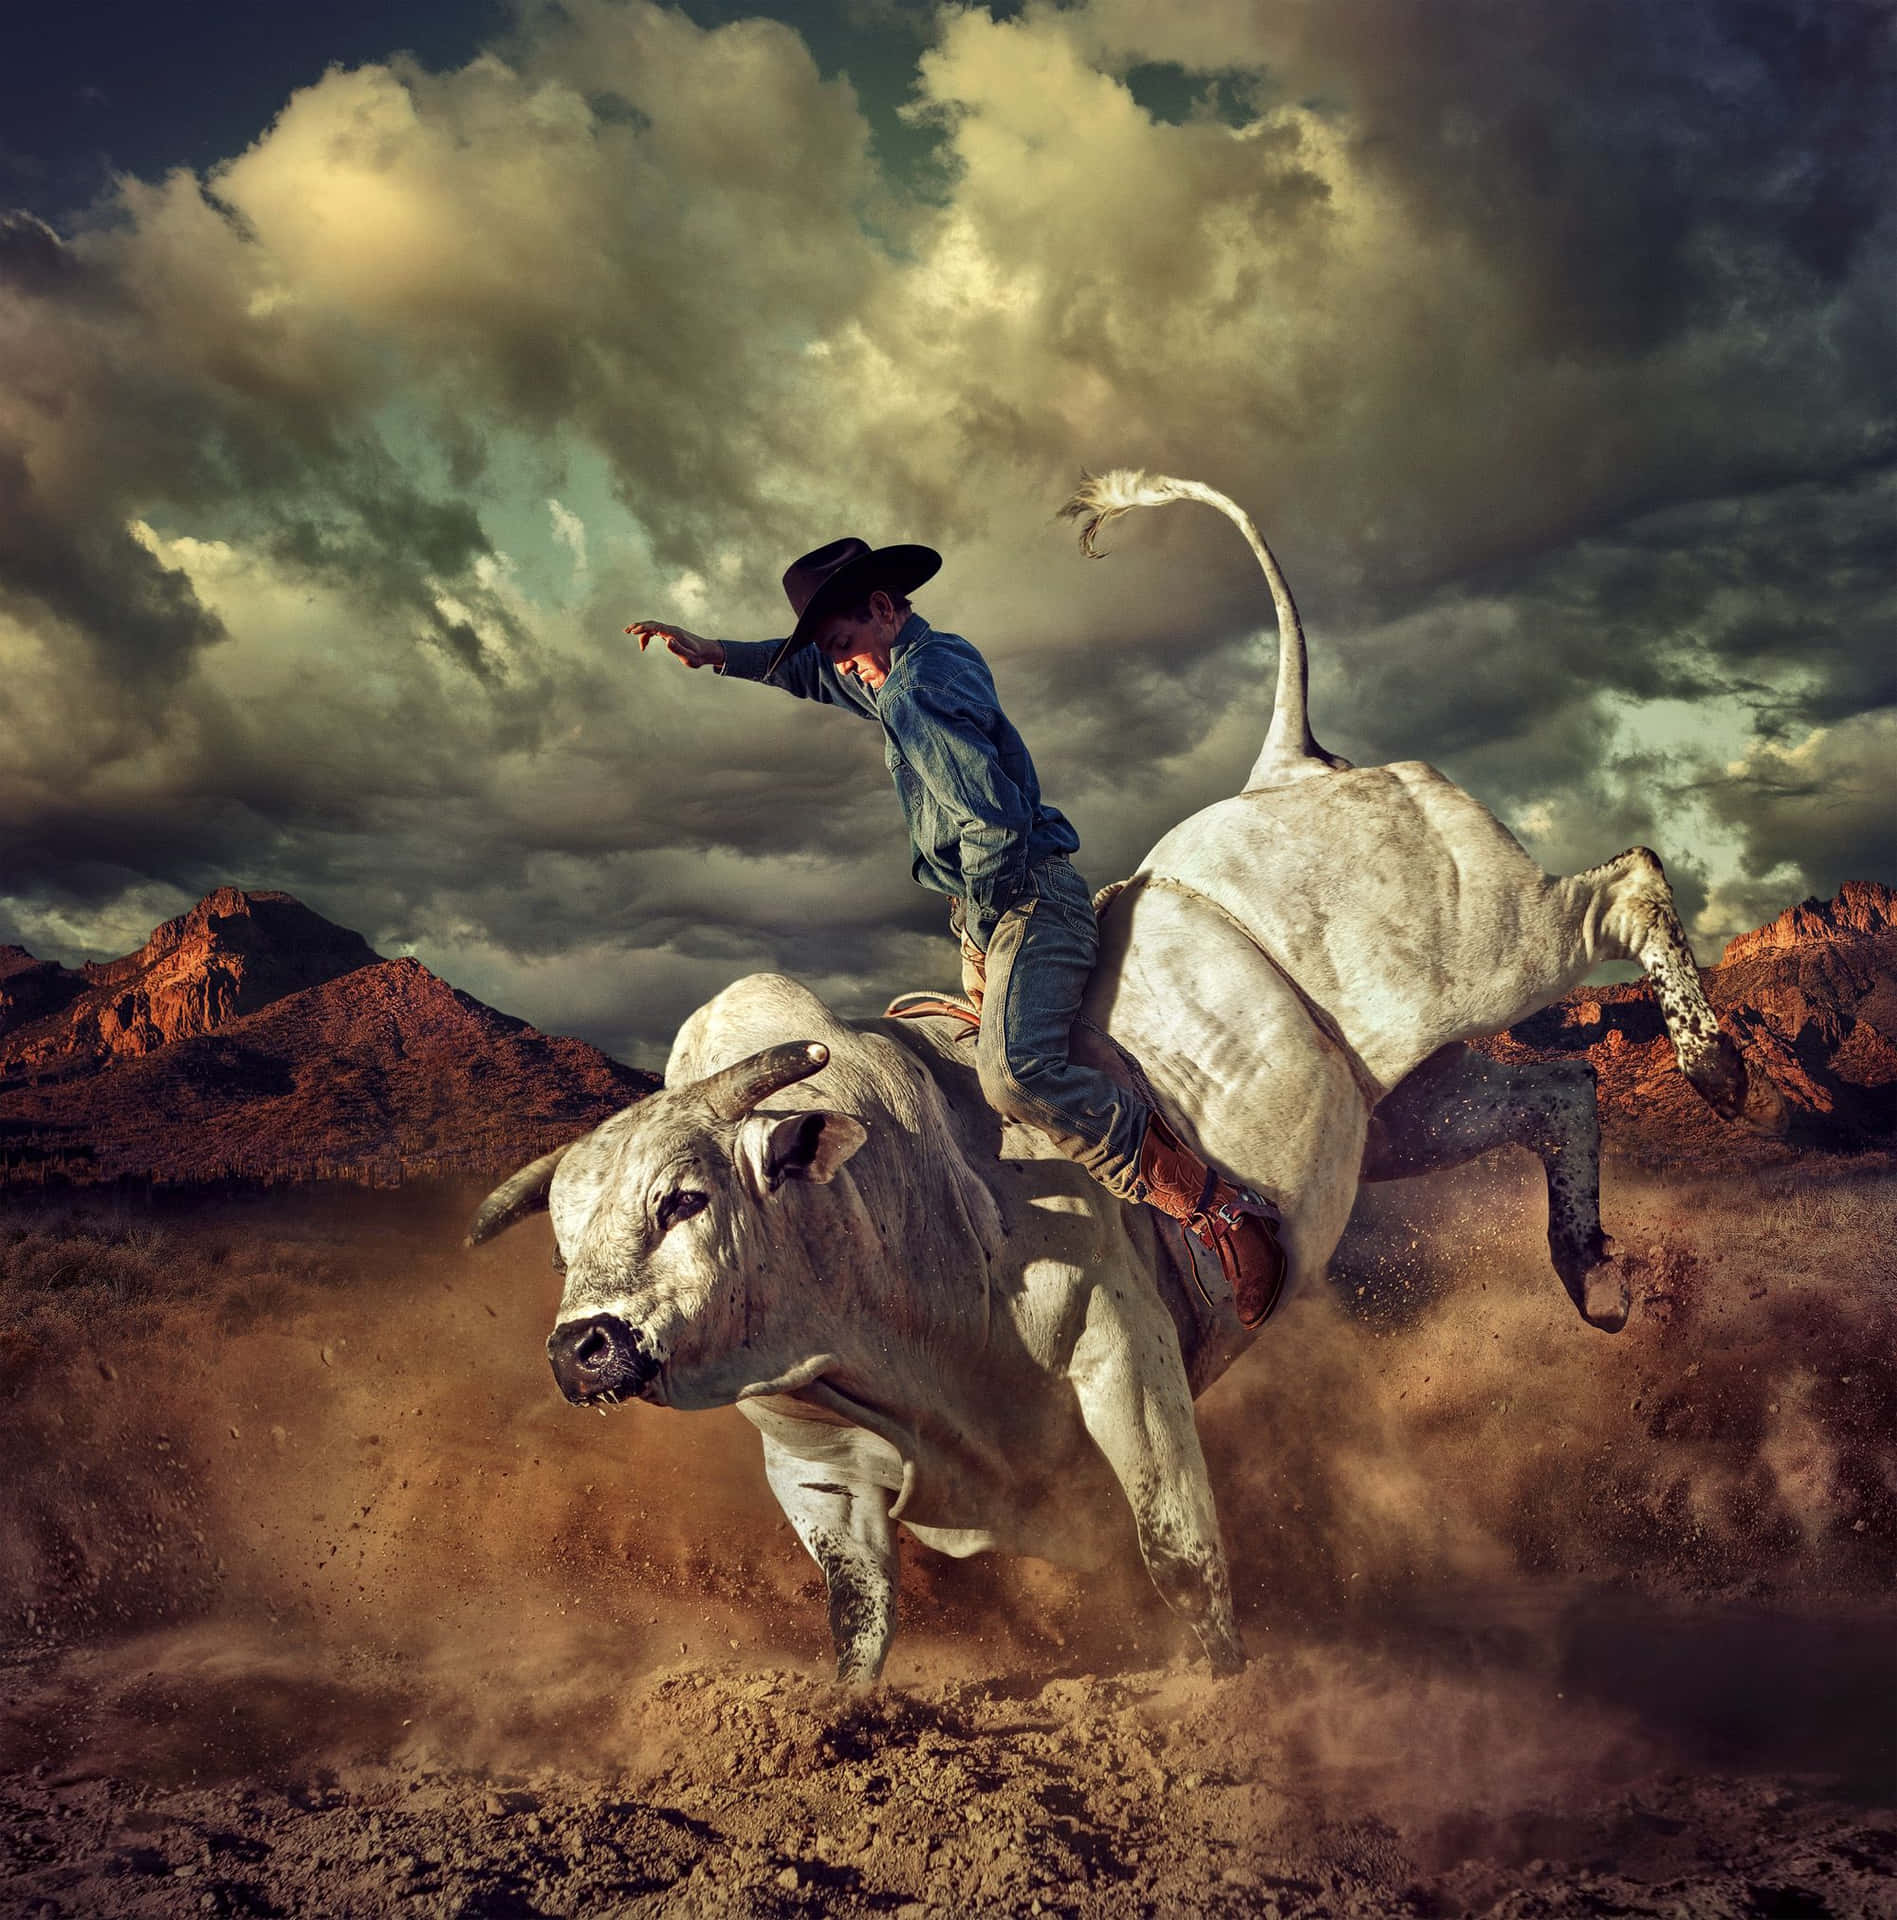 Braving the Wild on the Back of a Bull